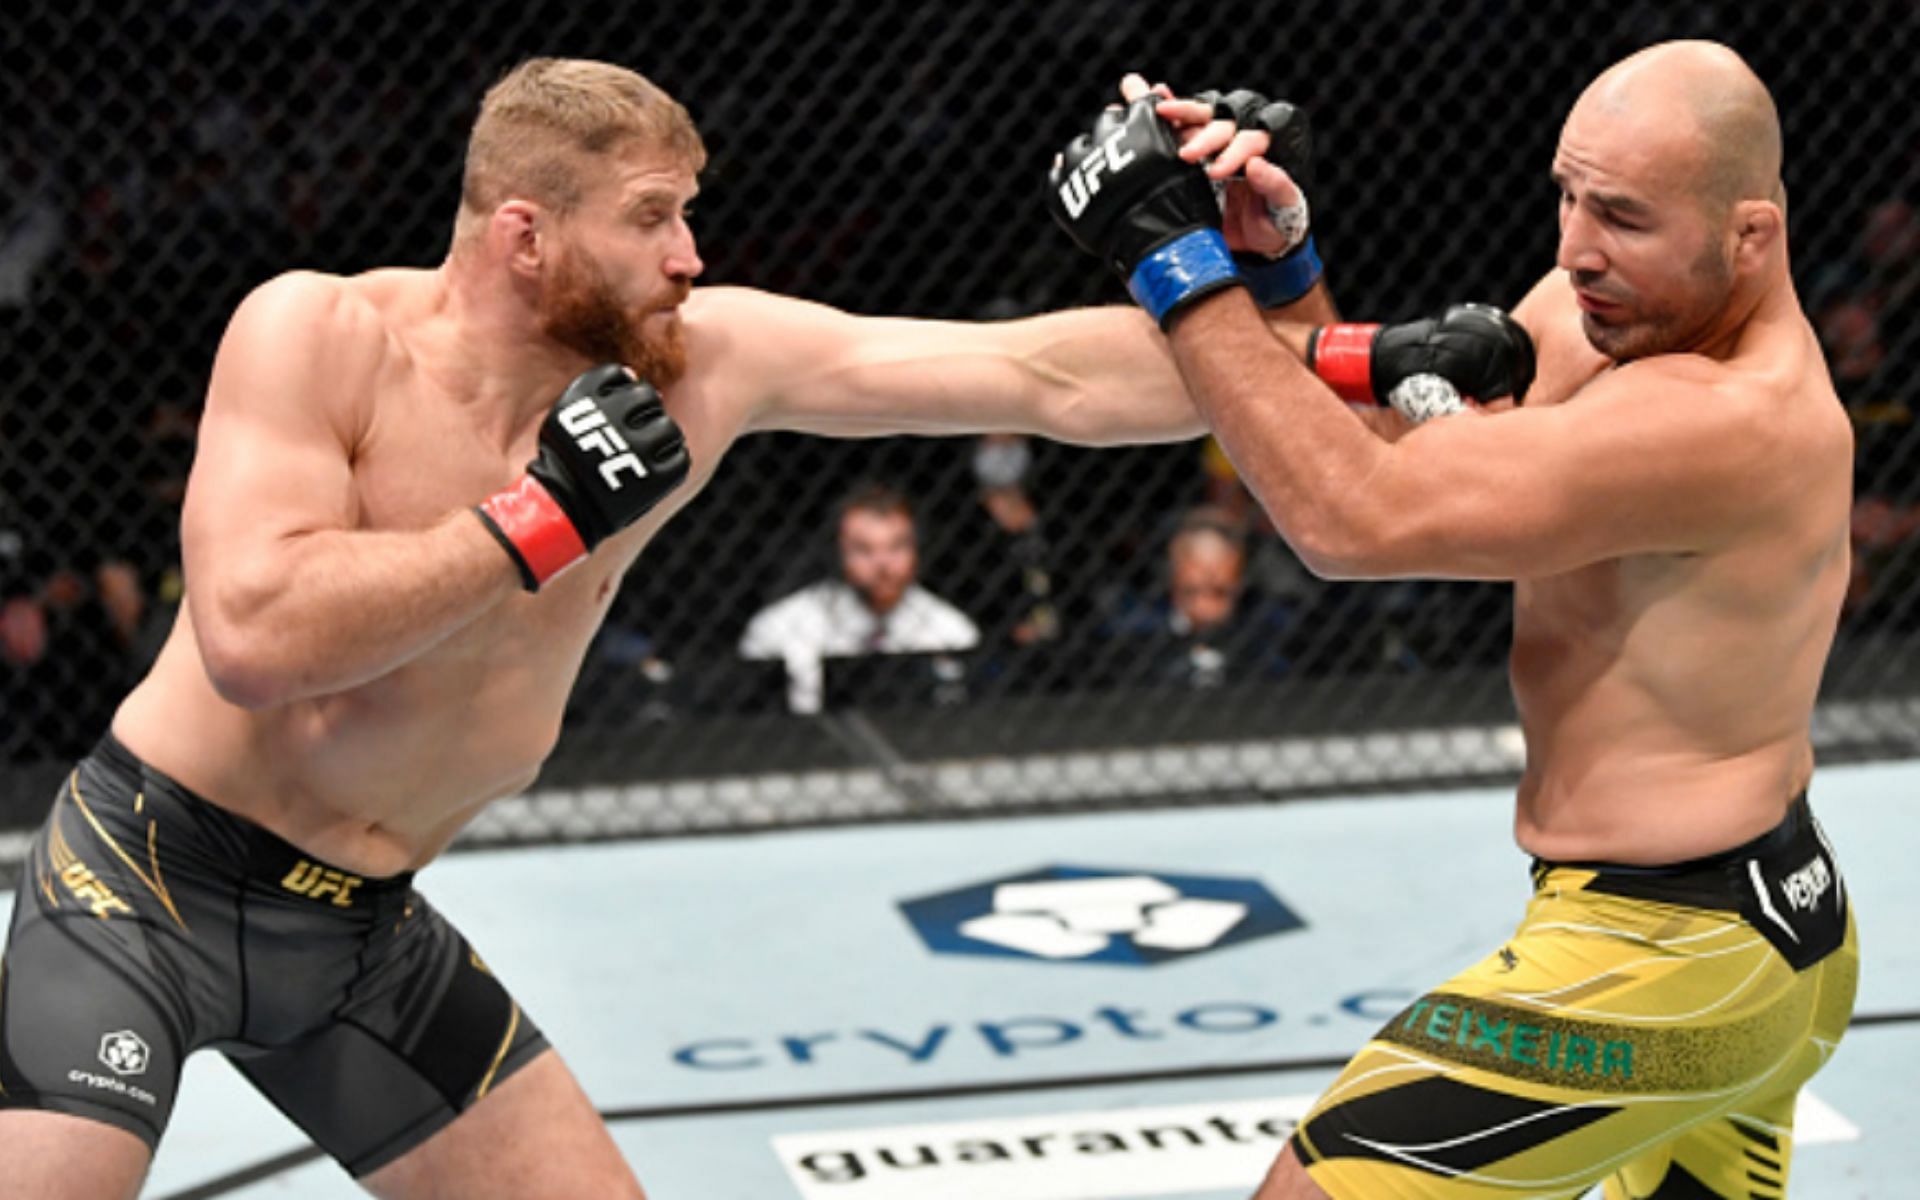 Jan Blachowicz (left) and Glover Teixeira (right) clashed in the main event of UFC 267